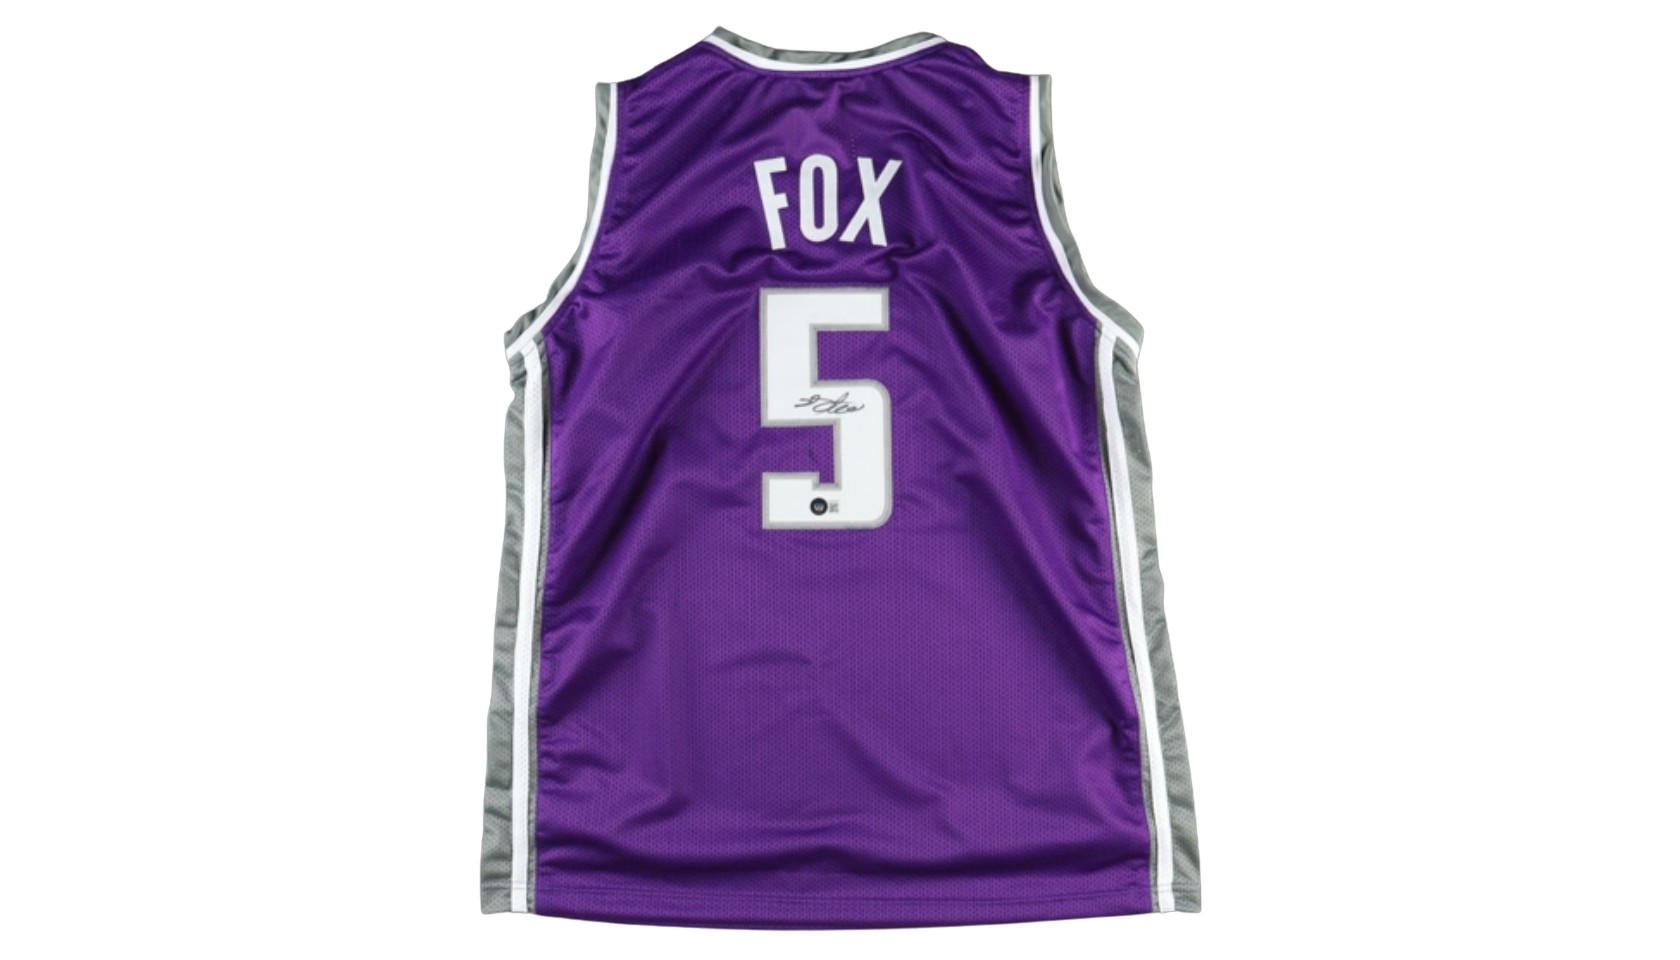 Anyone interested in buying this jersey signed by fox? : r/kings